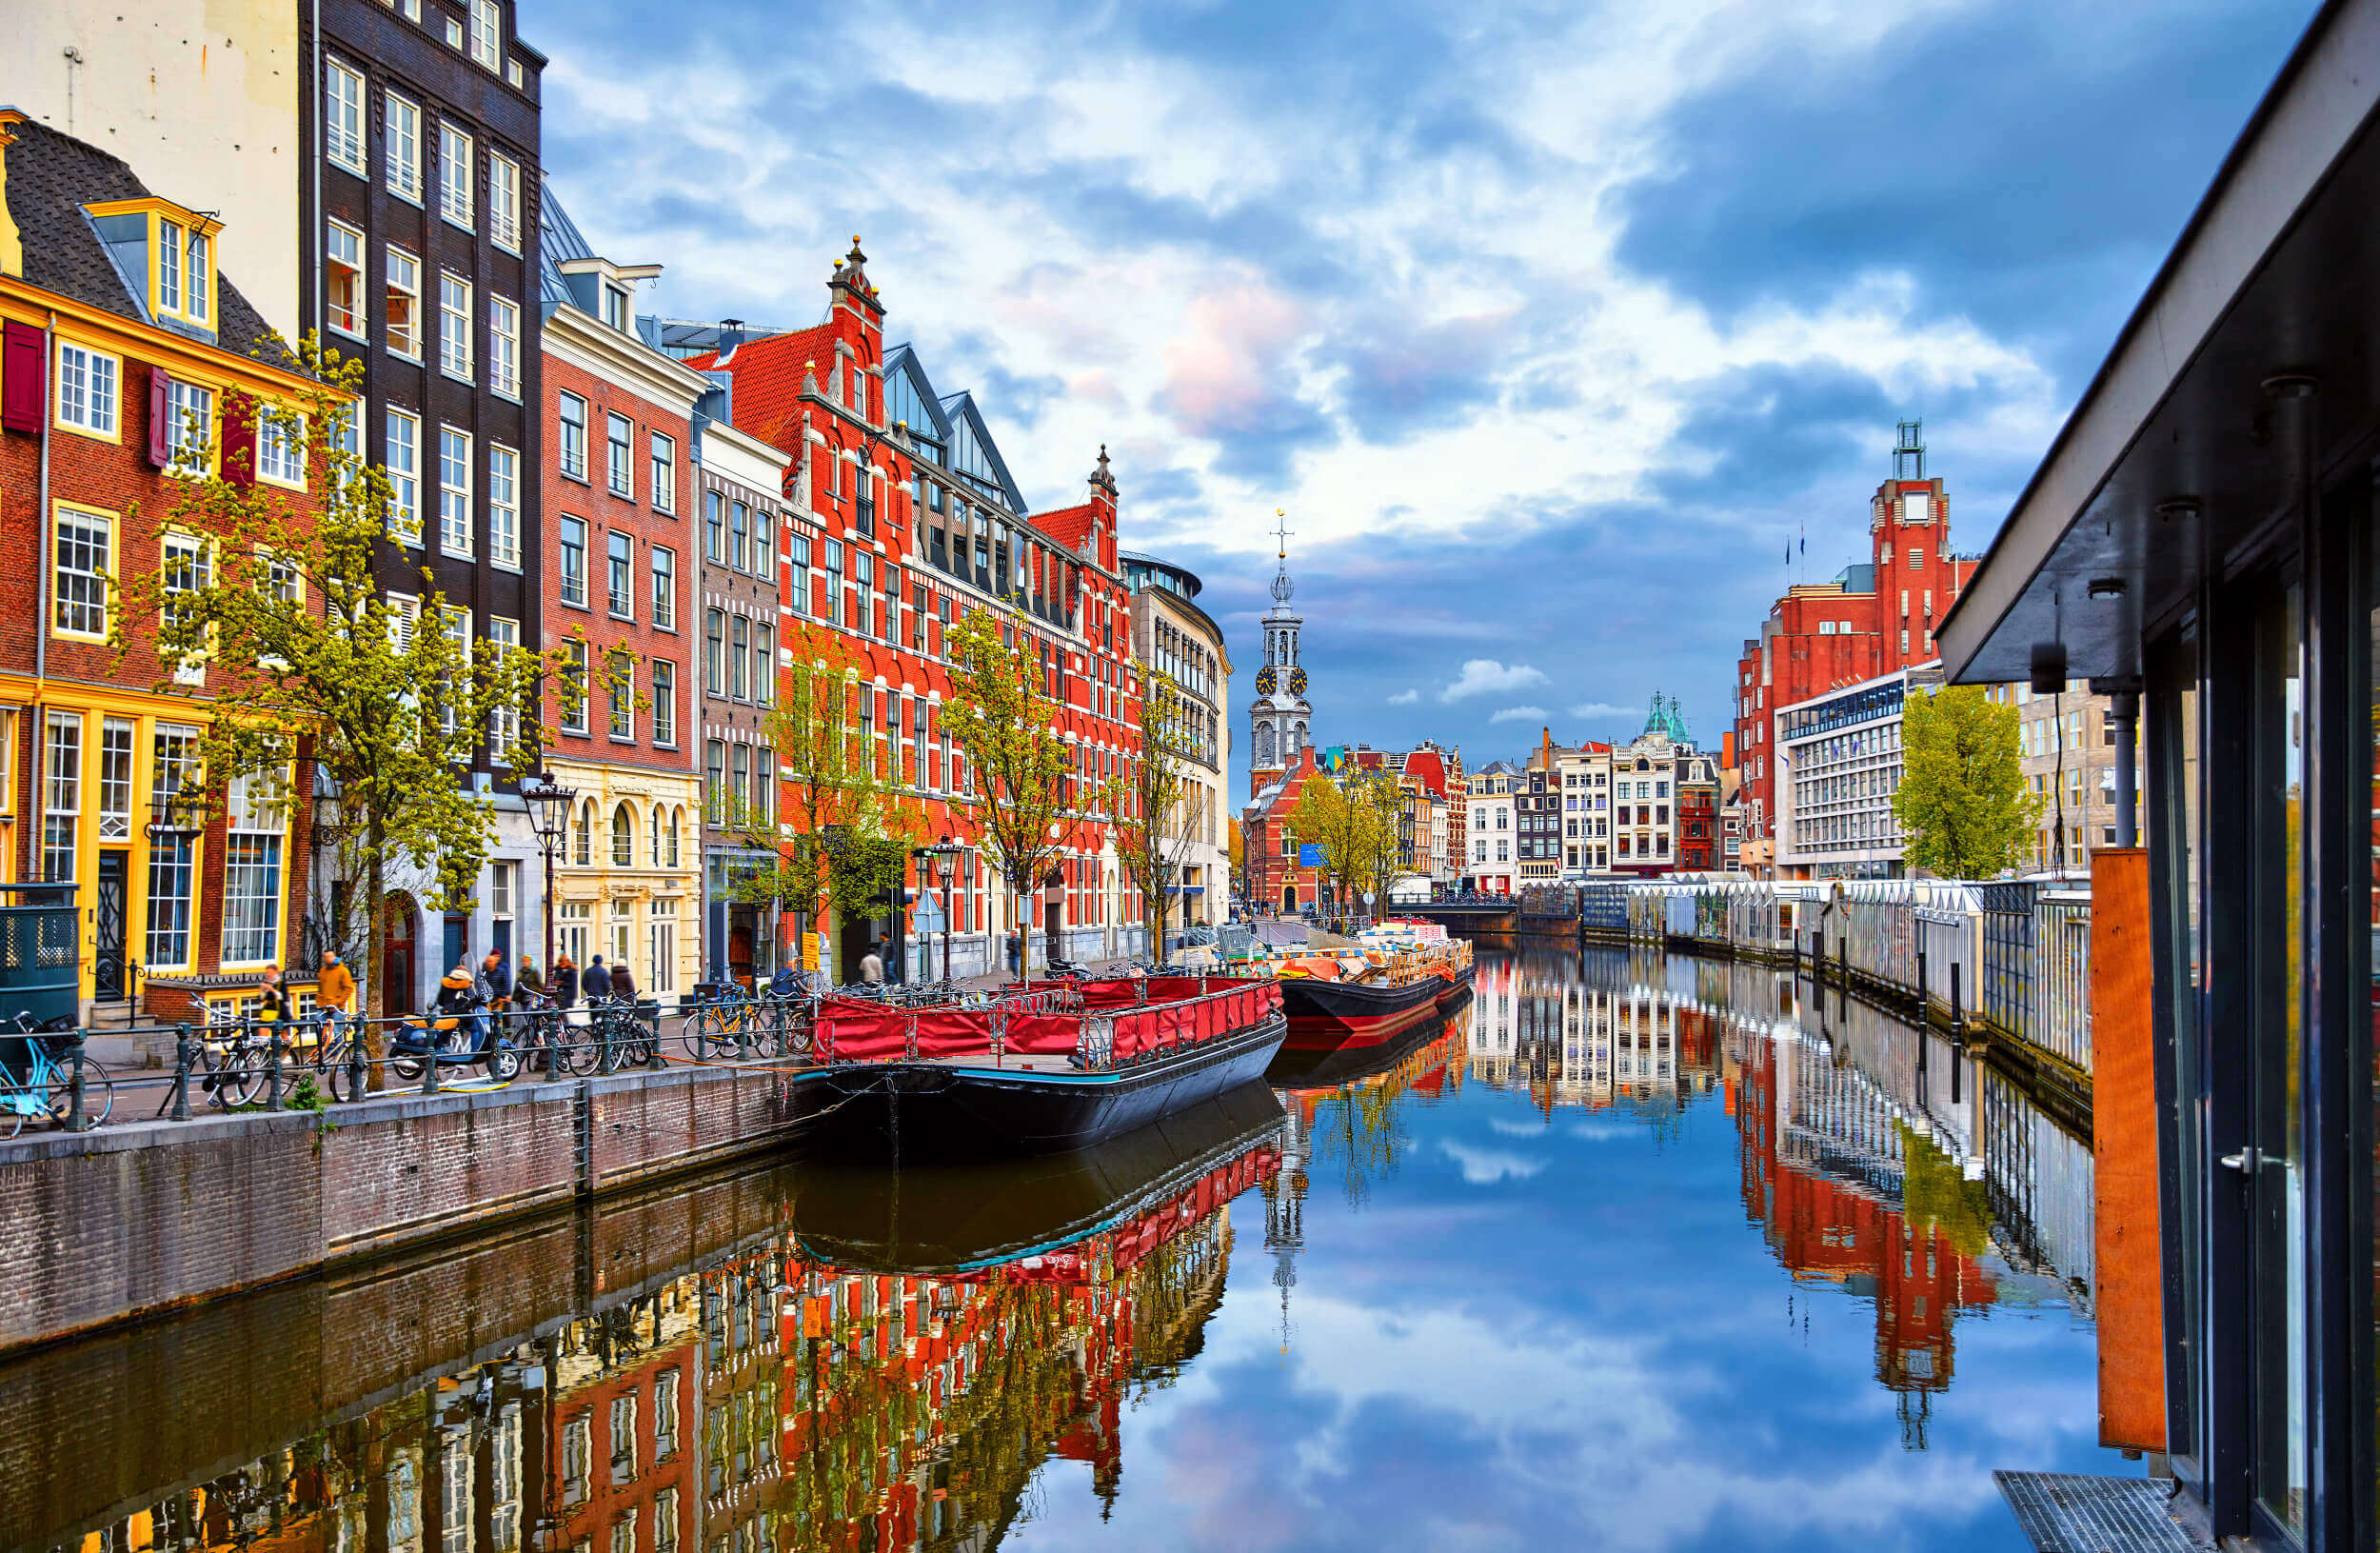 Amsterdam to Buy Young Adults' Debts to Gain Higher Education and Jobs